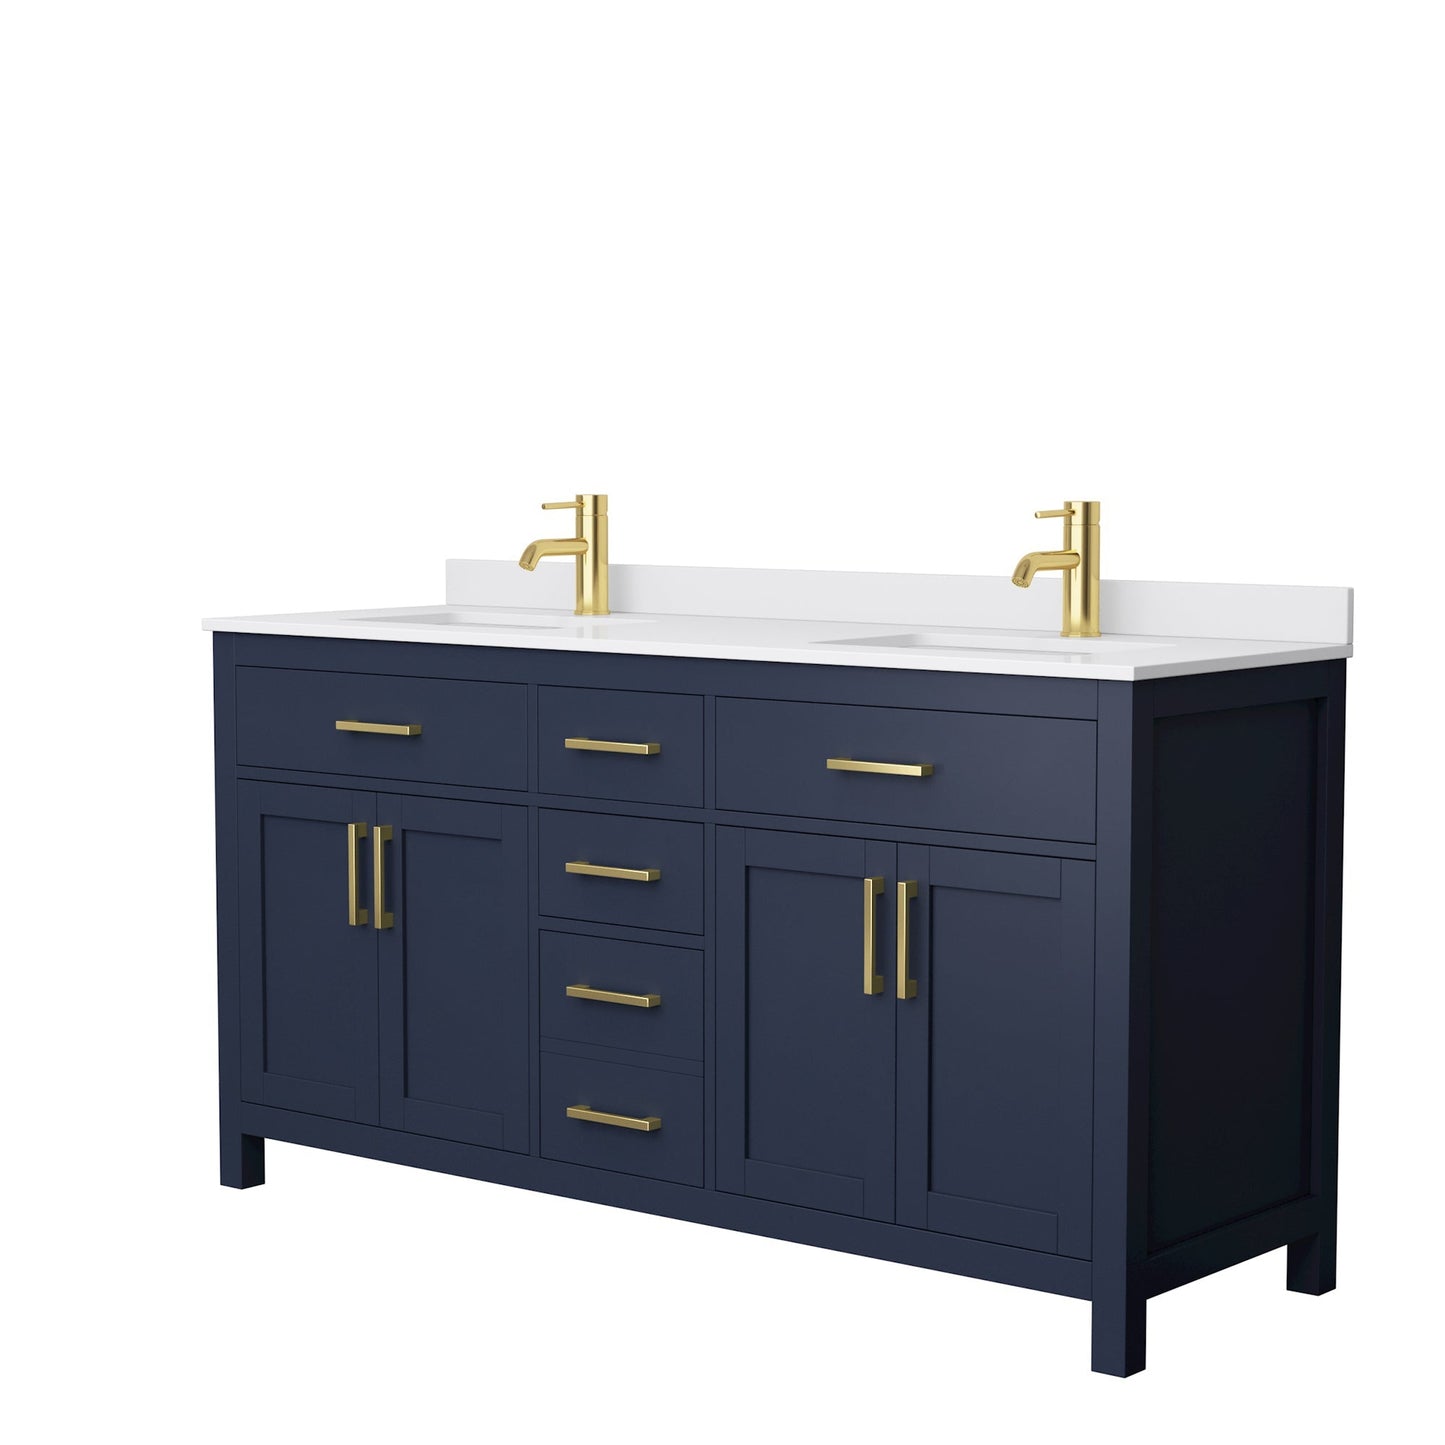 Wyndham Collection Beckett 66" Double Bathroom Dark Blue Vanity With White Cultured Marble Countertop, Undermount Square Sink And Brushed Gold Trim